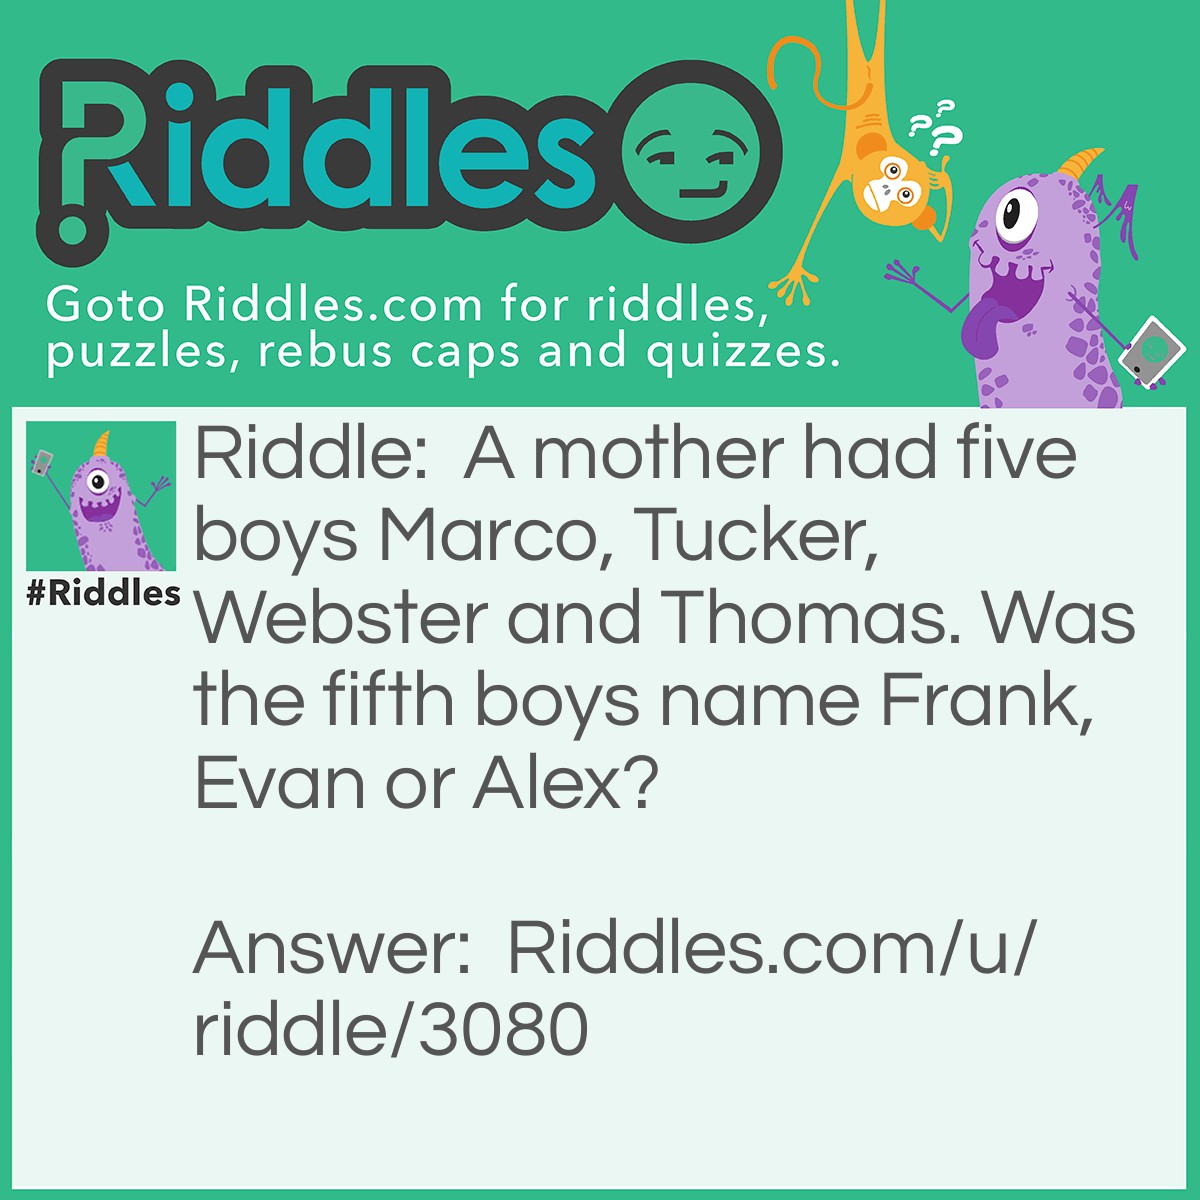 Riddle: A mother had five boys Marco, Tucker, Webster and Thomas. Was the fifth boys name Frank, Evan or Alex? Answer: The answer is Frank.  The mother named the kids with the first two letters of the days of the week.Monday is Marco, Tuesday is Tucker, Wednesday is Webster, Thursday is Thomas and Friday is Frank.